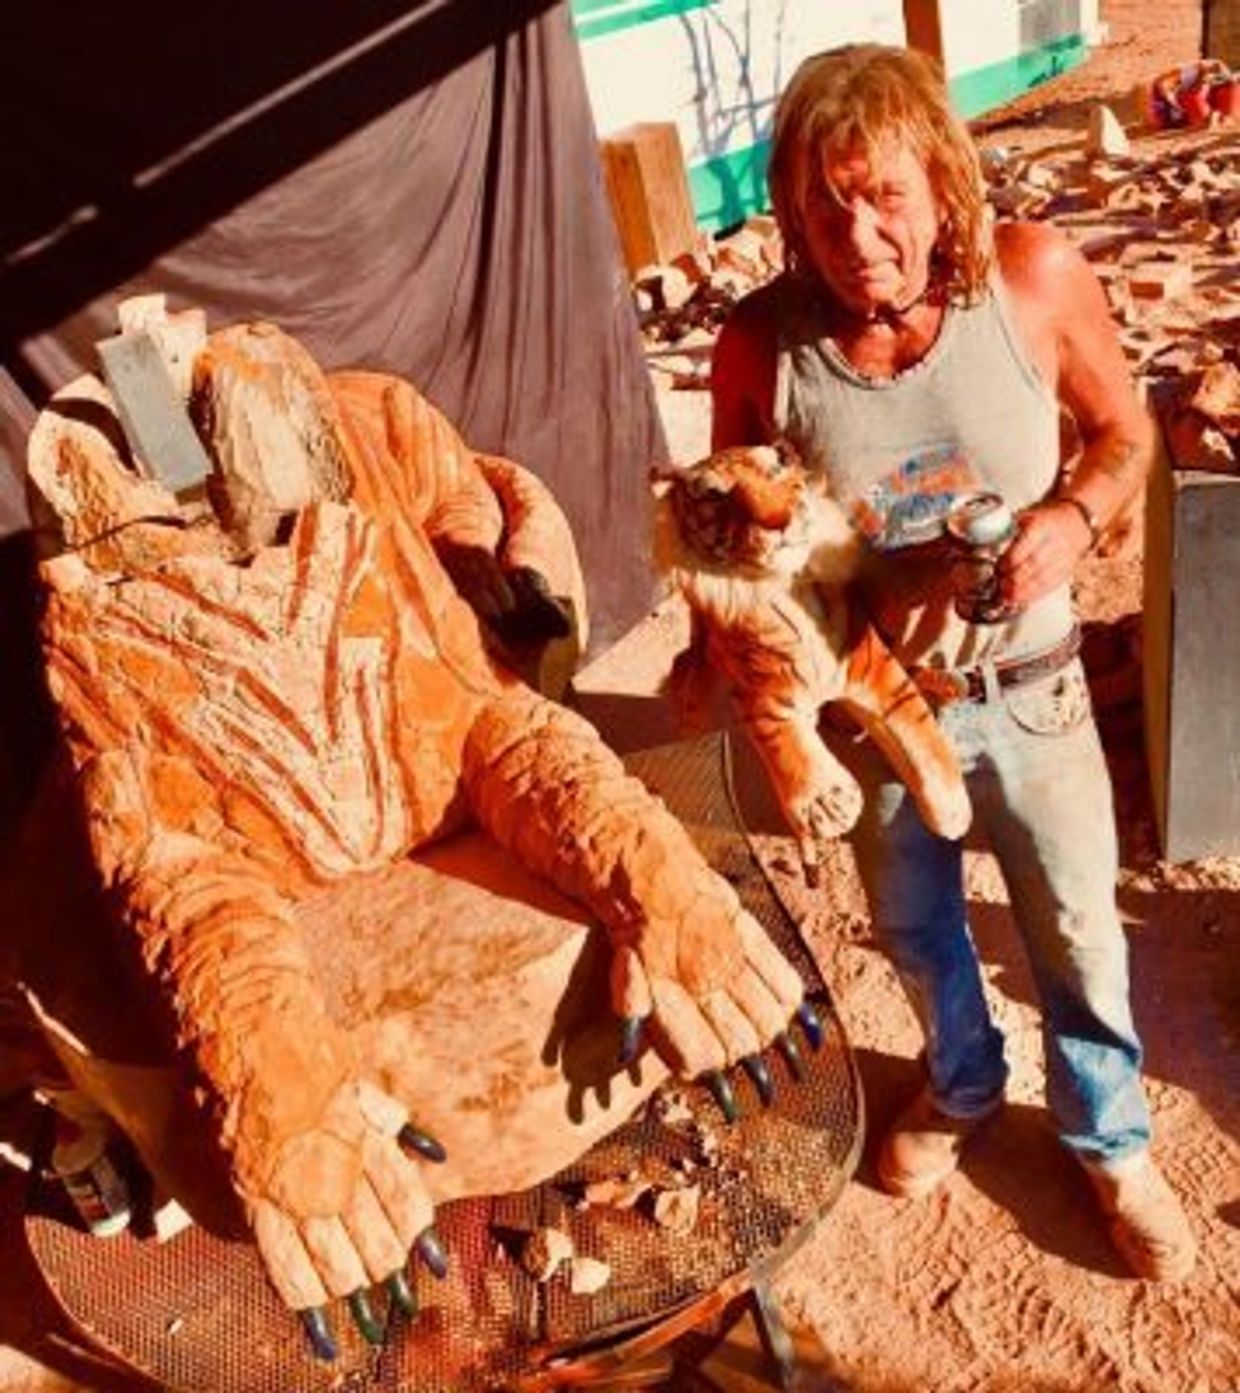 Cal the Stoner poses with The Andamooka Tiger in progress & his tiger plushie in the open-air studio